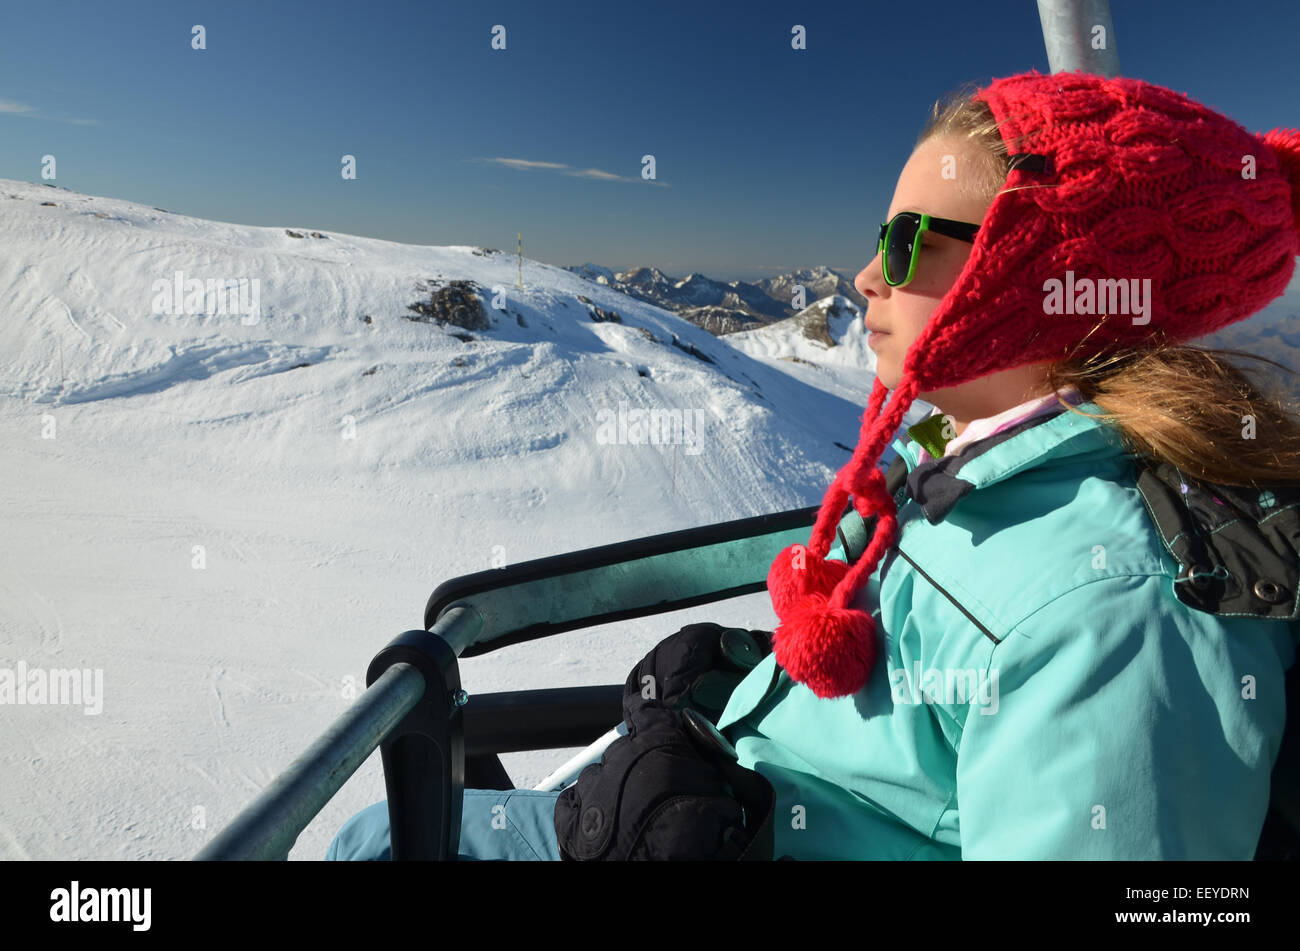 Young girl with red winter hat and  sun glasses on  chair lift at ski resort Pierre saint martin in Atlantic Pyrenees, white sno Stock Photo